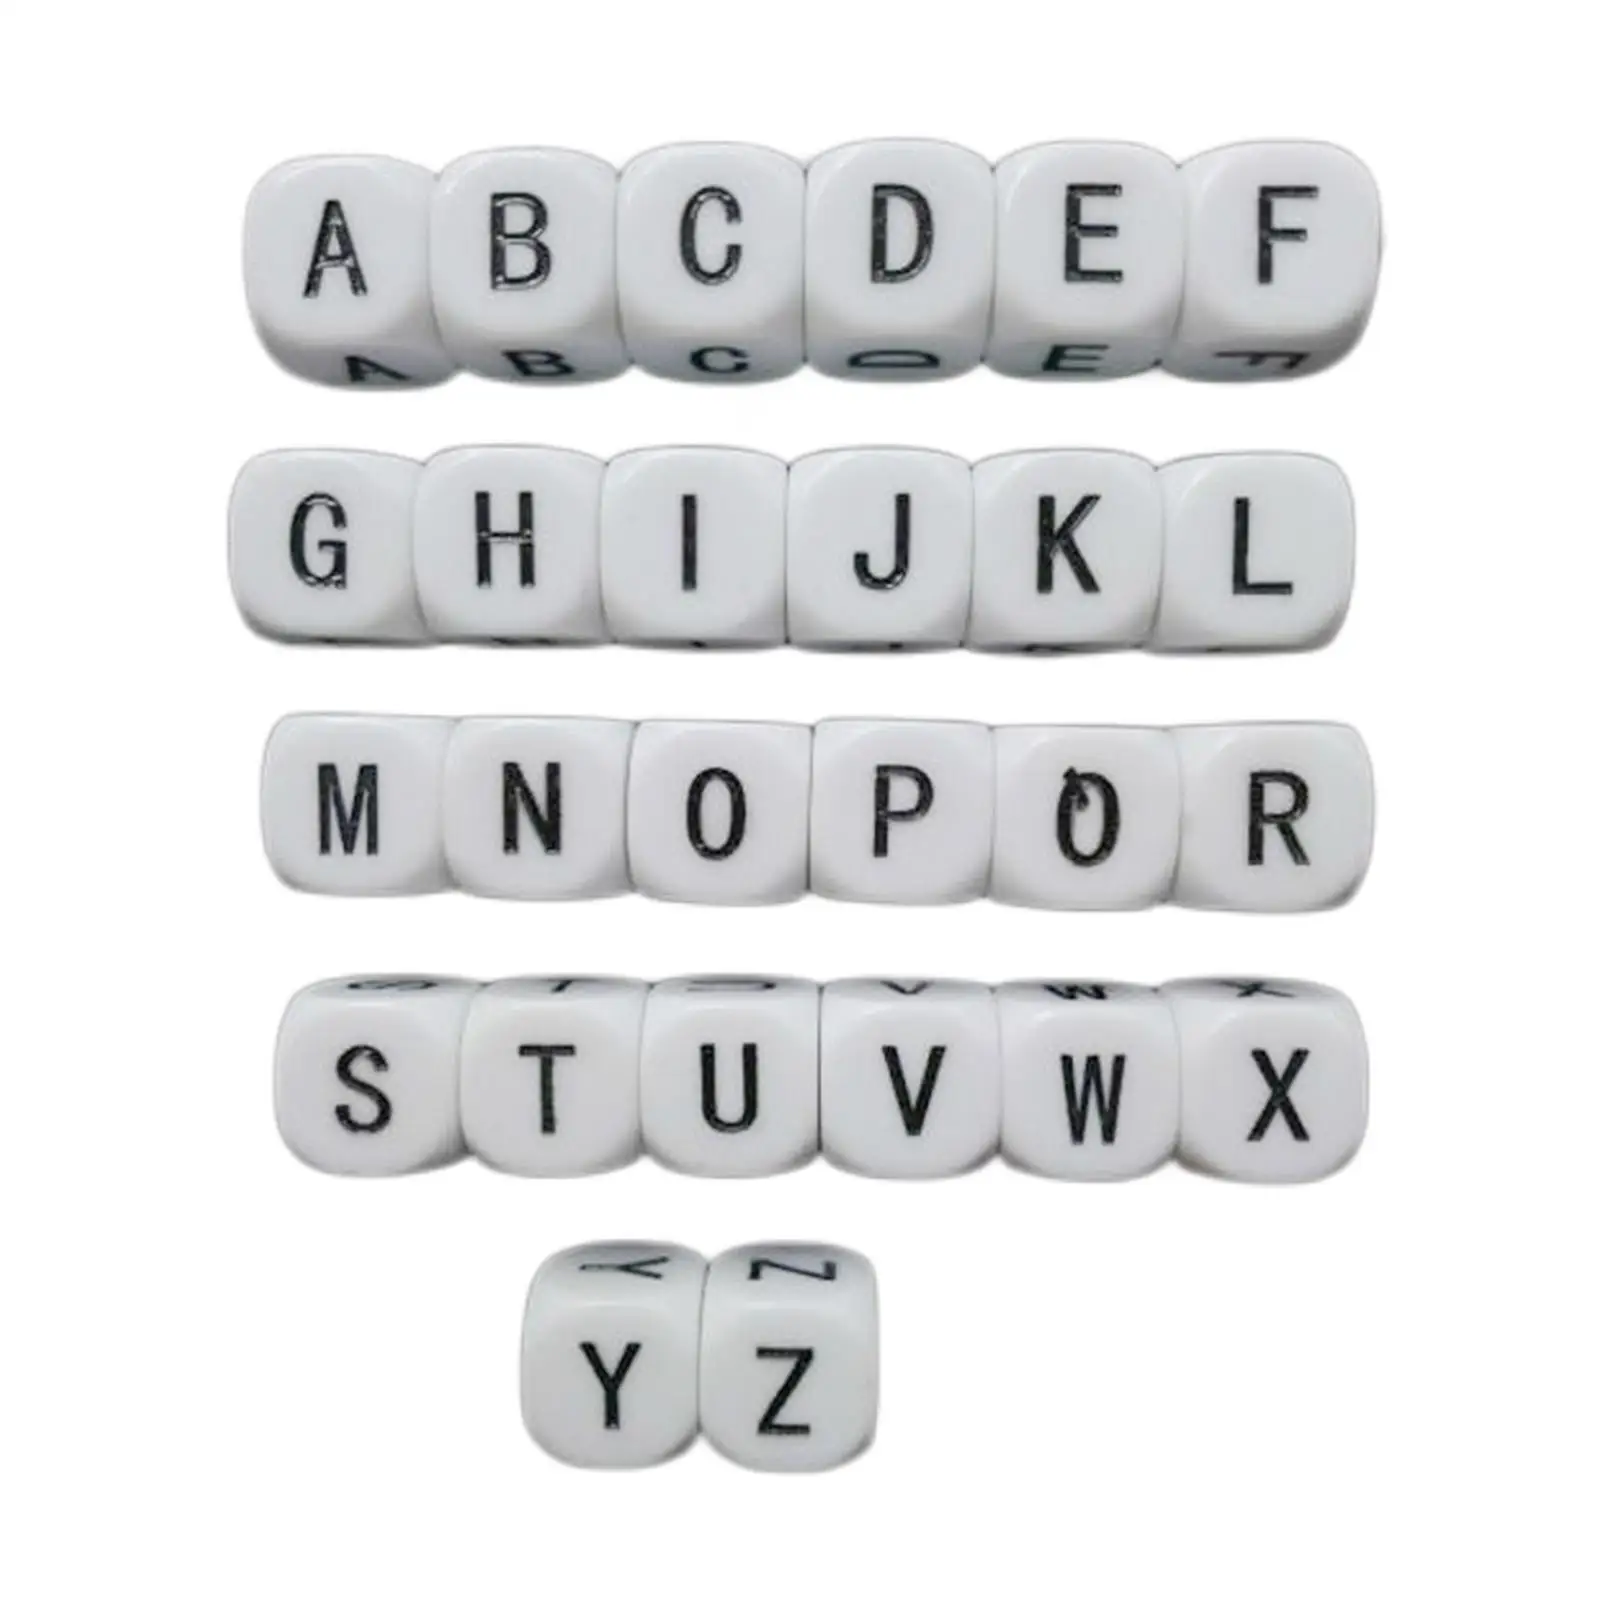 26Pcs Acrylic Letter Dice Standard Game Dice Six Sided for Early Learning Toy Party Favors